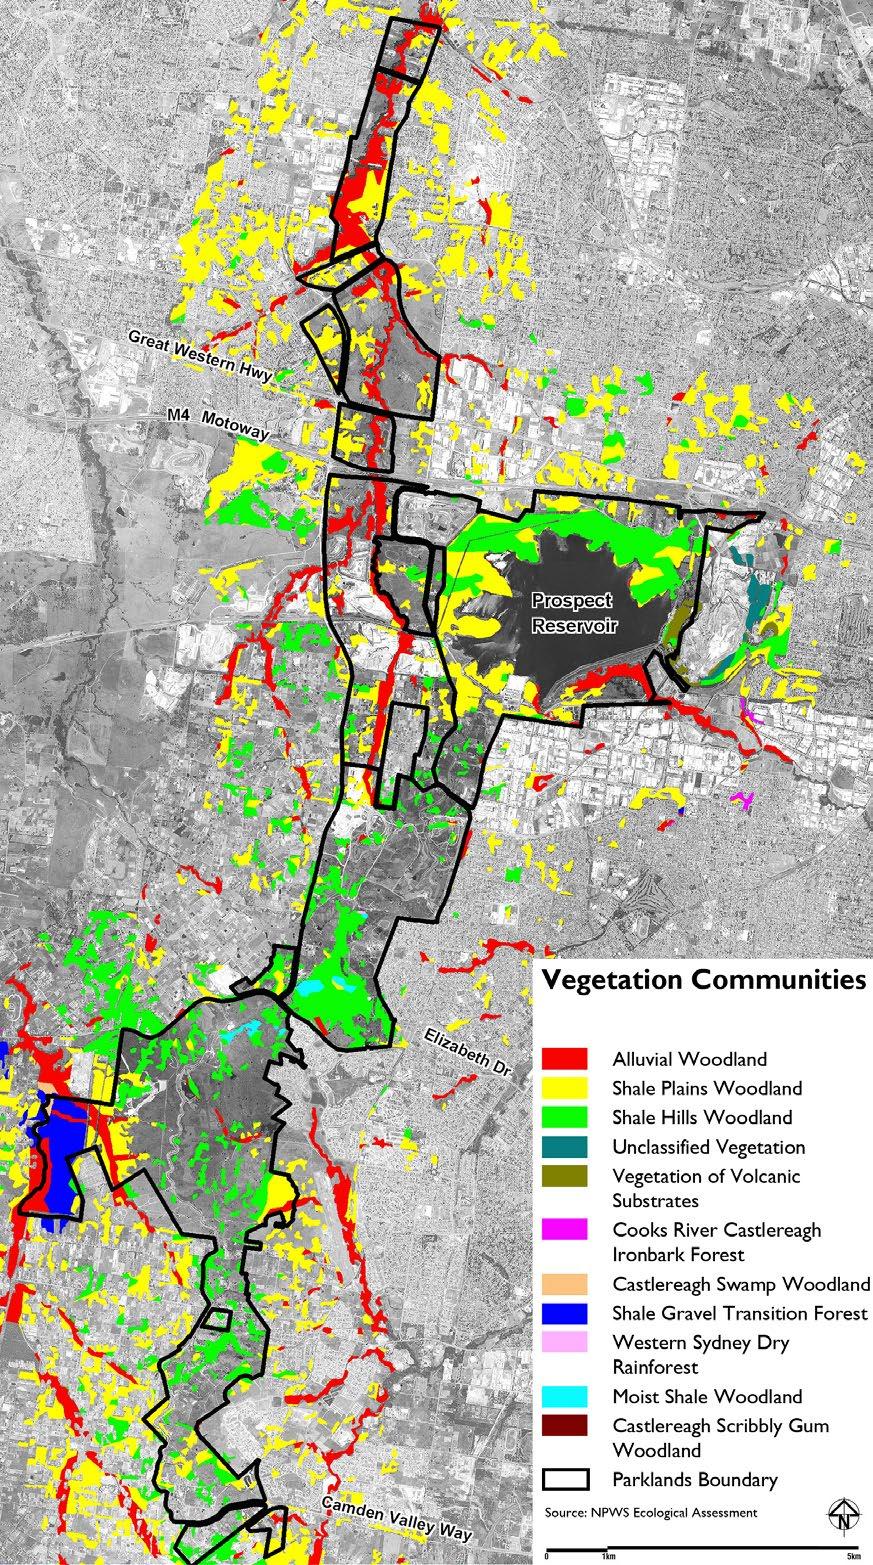 Following adoption of the management vision, the Western Sydney Parklands were subsequently created in 2006 by the Western Sydney Parklands Act, together with the Western Sydney Parklands Trust to